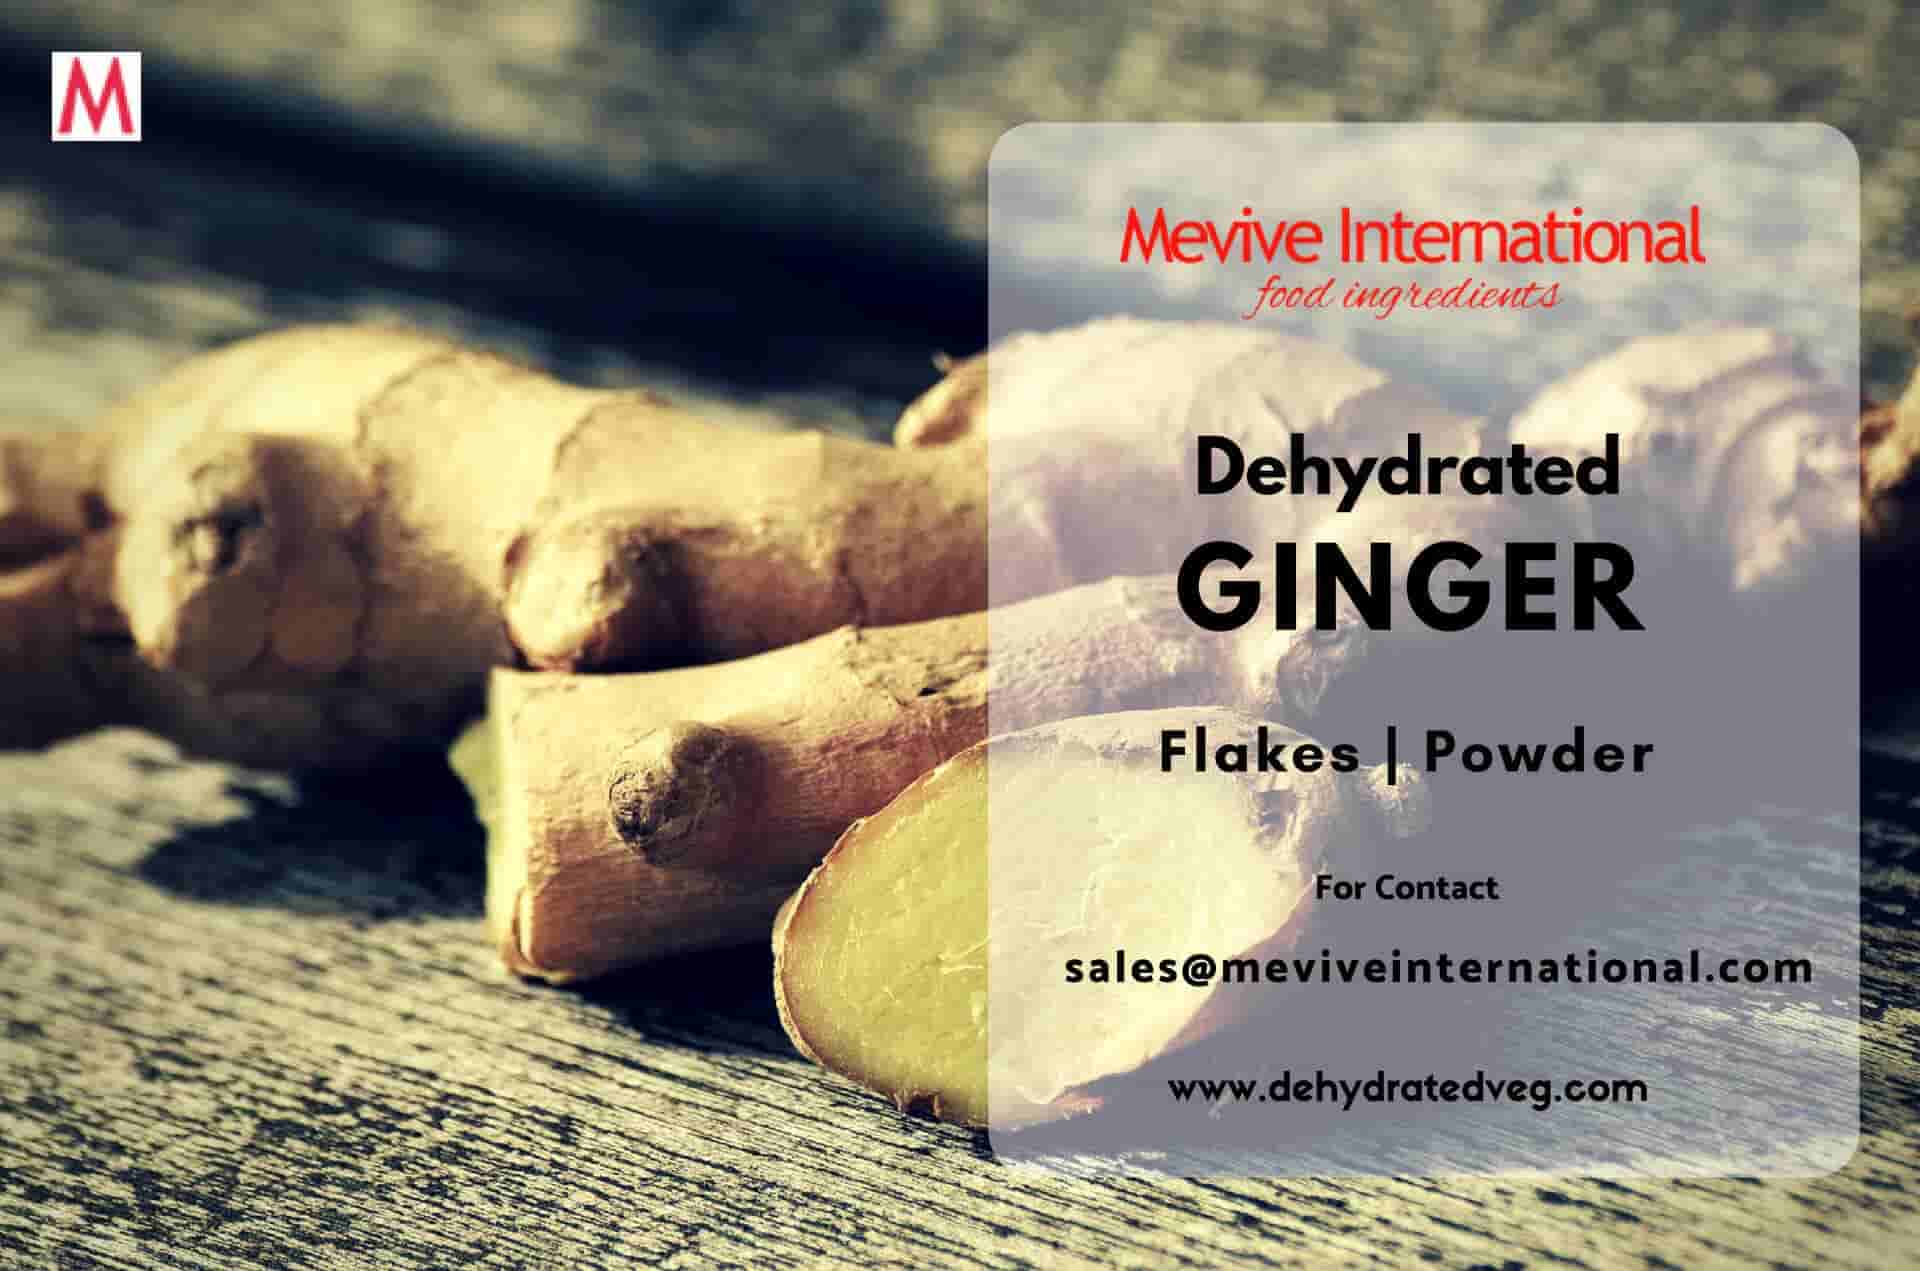 dehydrated ginger flakes and powder supplier in india 